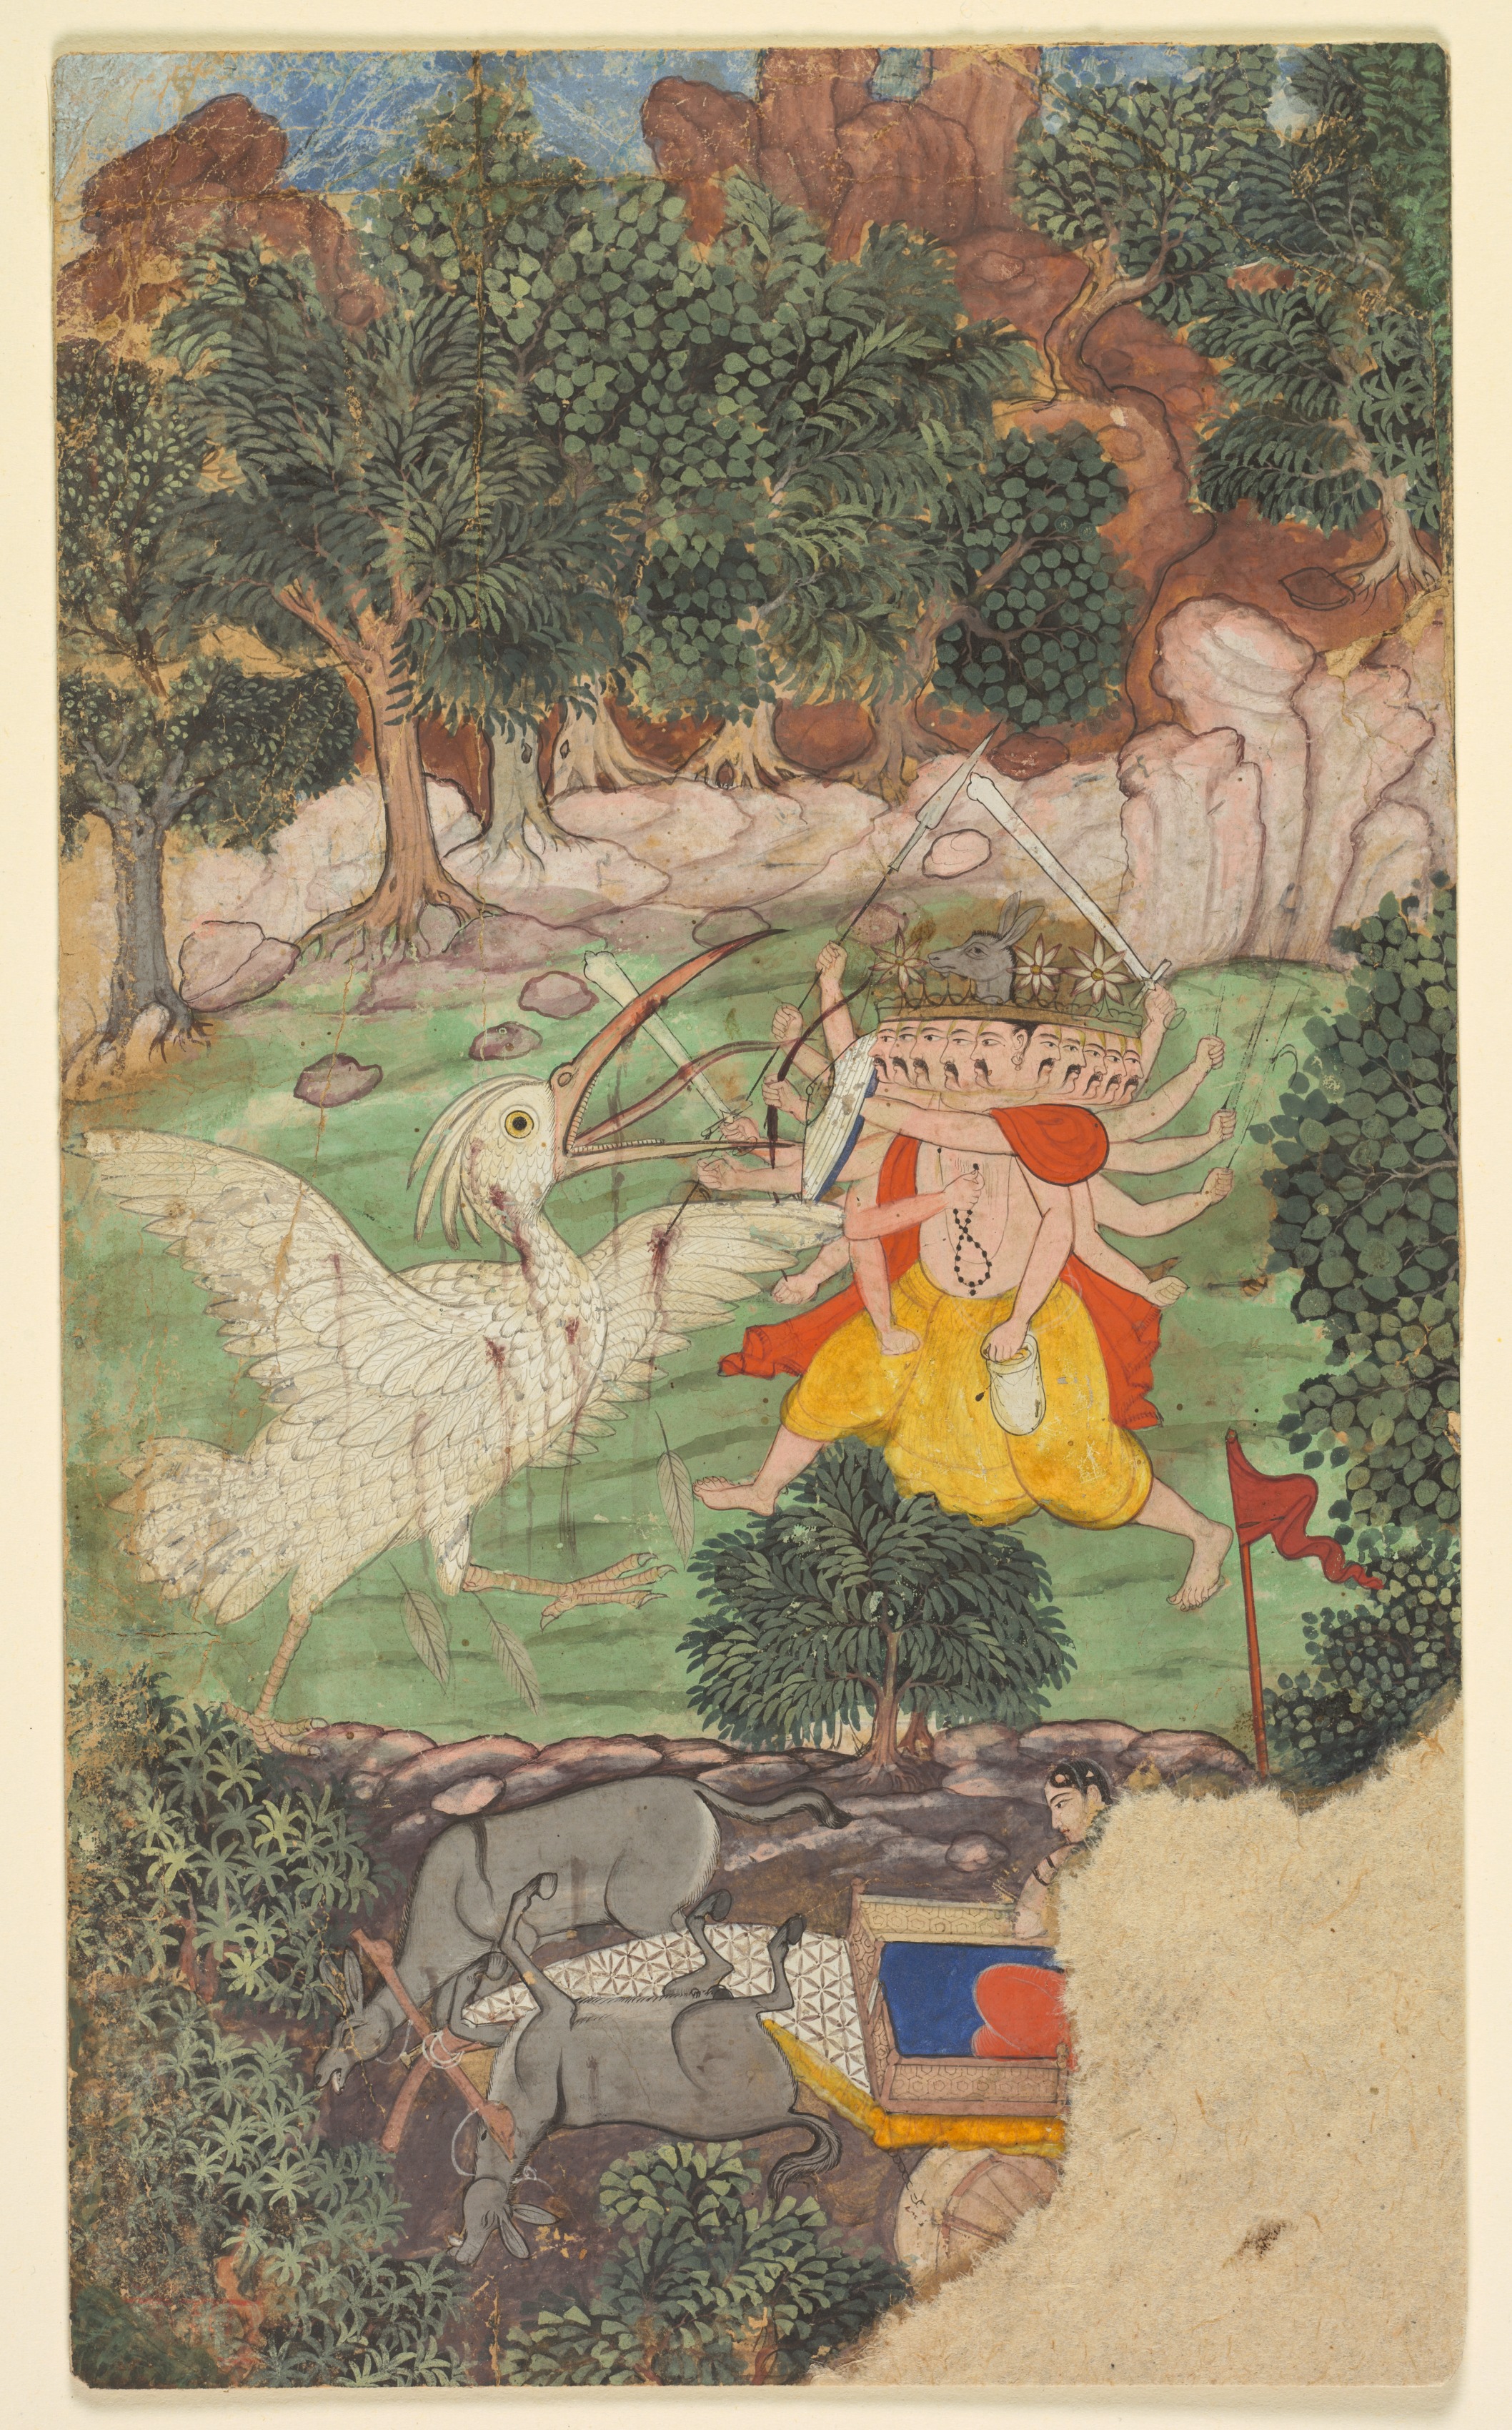 Battle of Ravana and Jatayu, from Chapters 50 and 51 of the Aranya Kanda (Book of the Forest) of Valmiki's Ramayana (Rama’s Journey); folio from the "Burnt" Ramayana